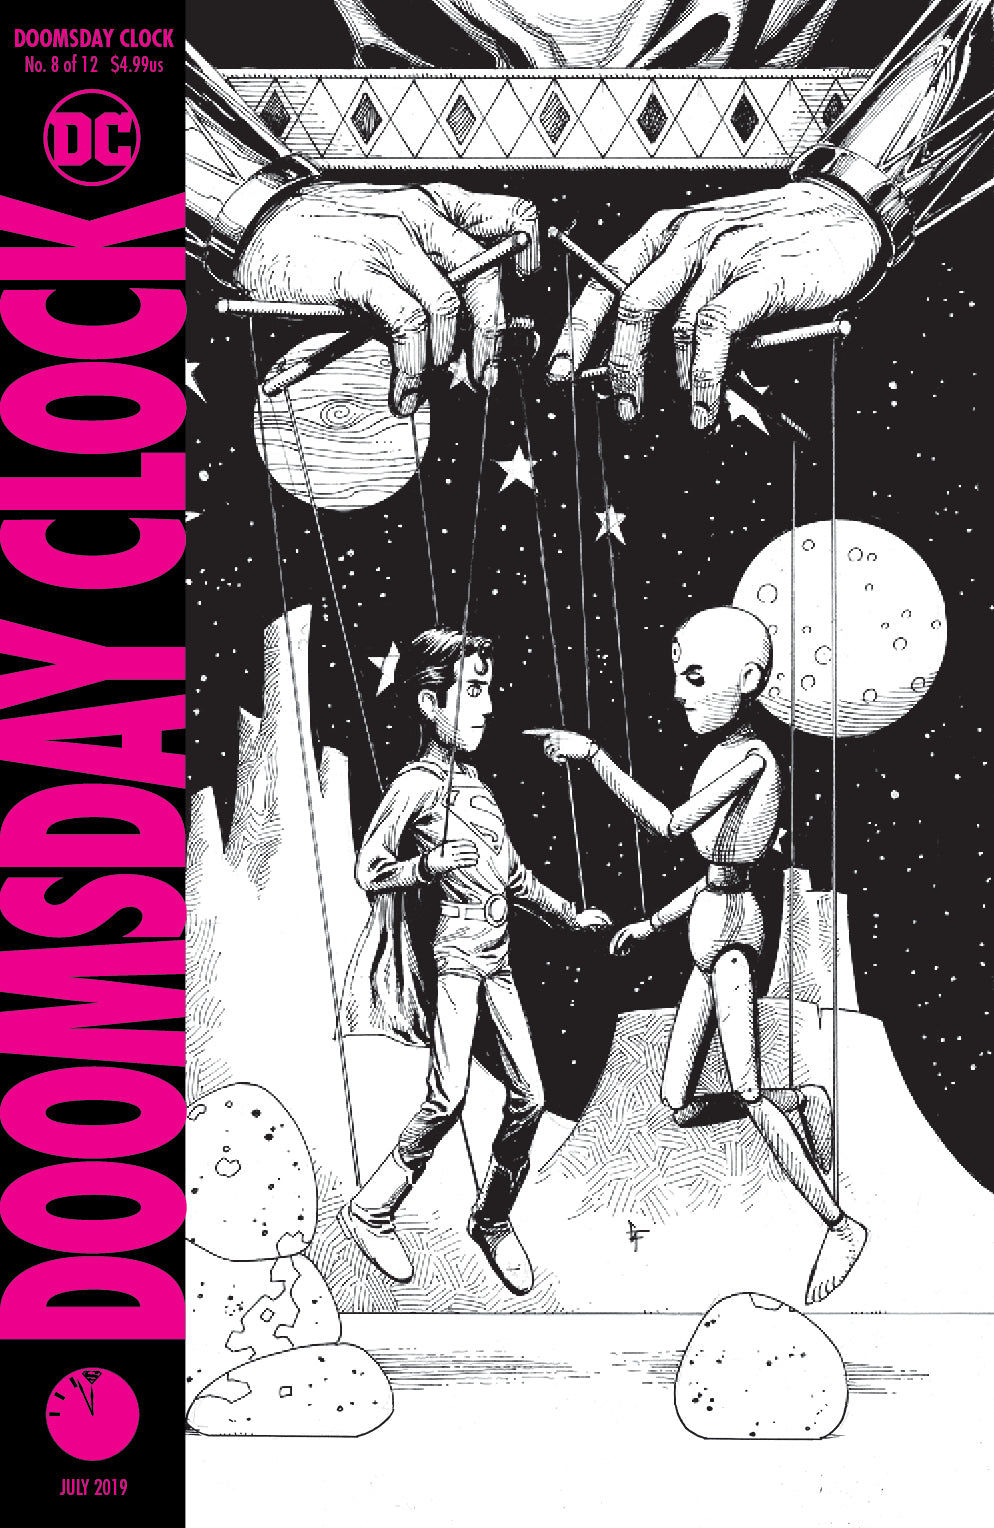 DOOMSDAY CLOCK #8 (OF 12) 2ND PTG | L.A. Mood Comics and Games